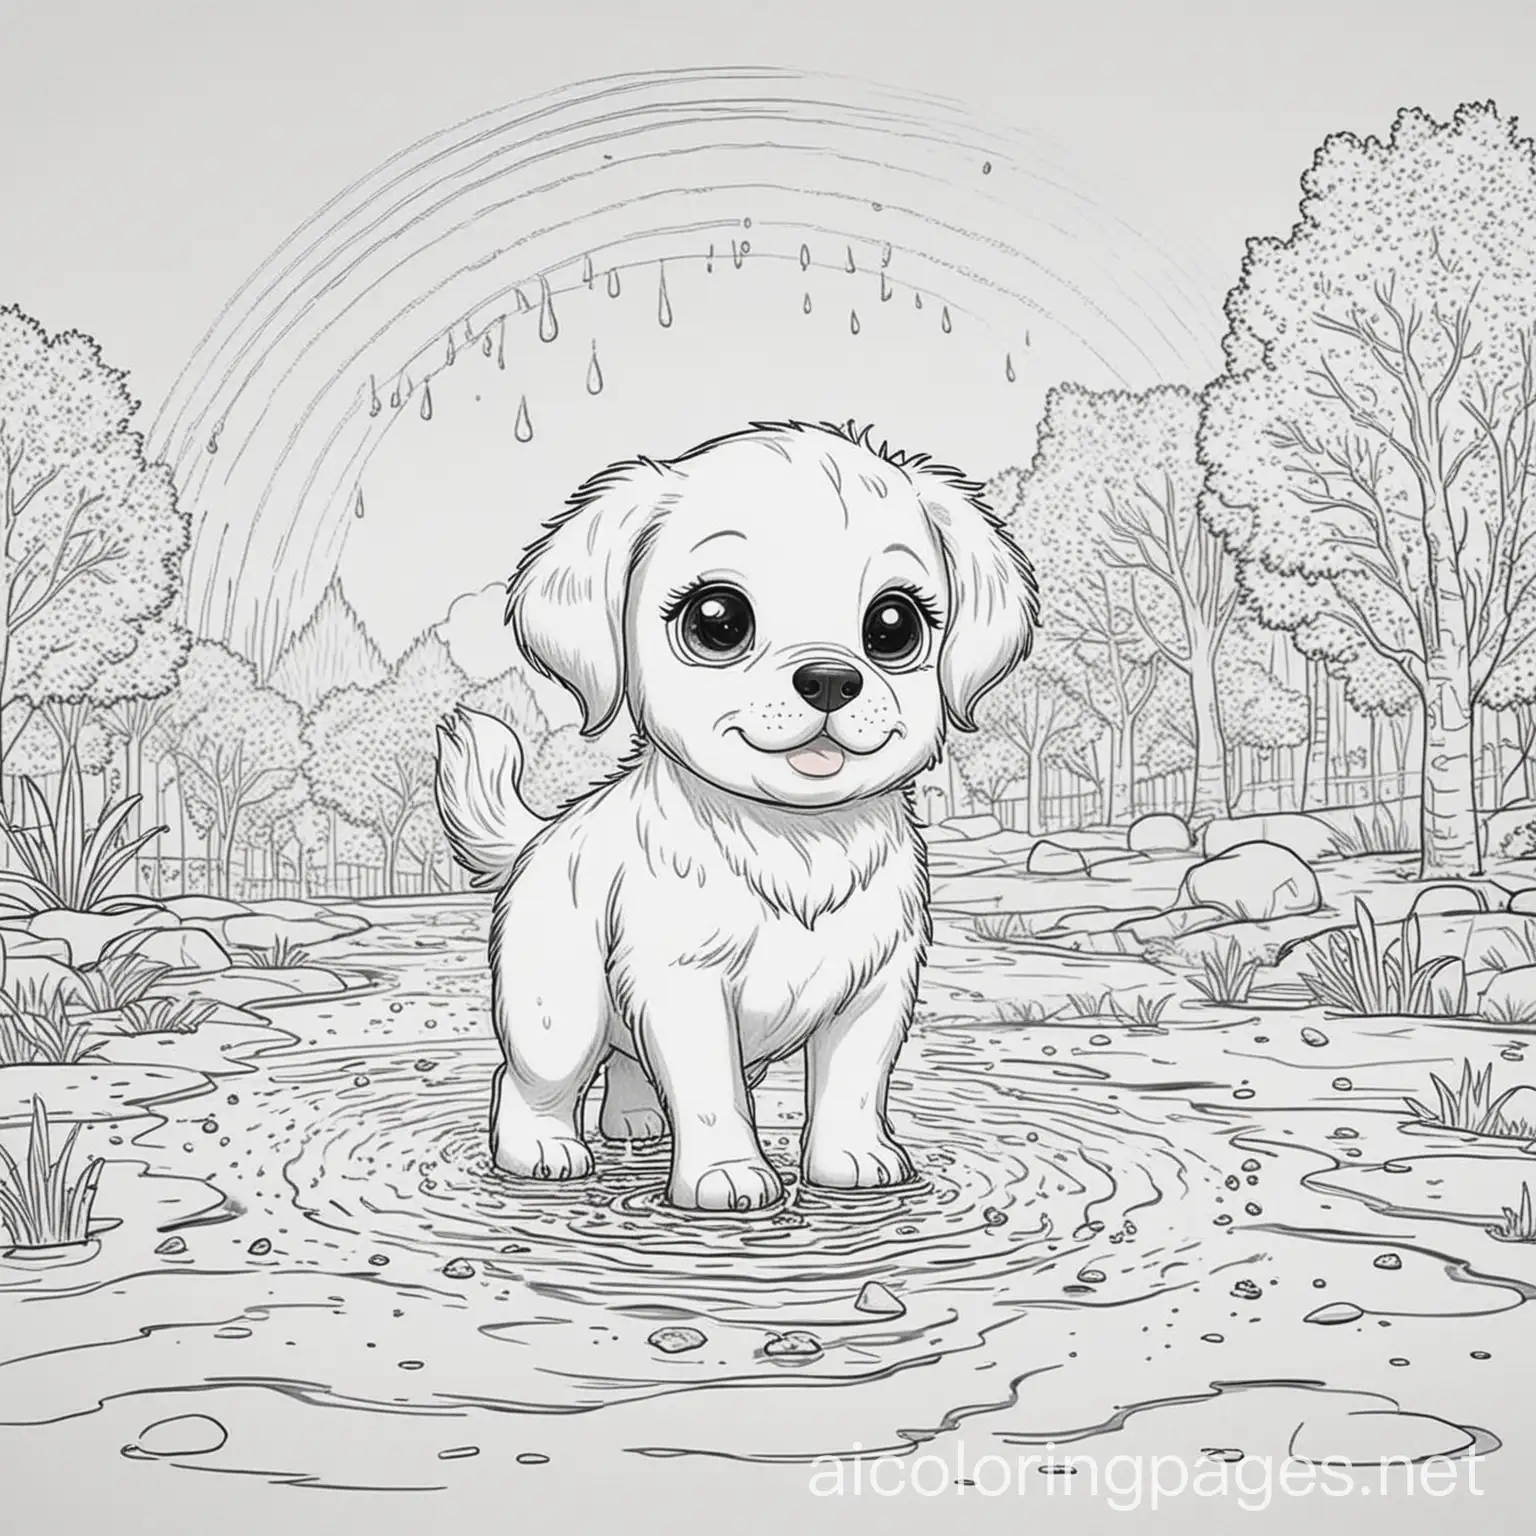 Playful-Puppy-Splashing-in-Puddle-Under-Rainbow-Sunny-Park-Scene-Coloring-Page